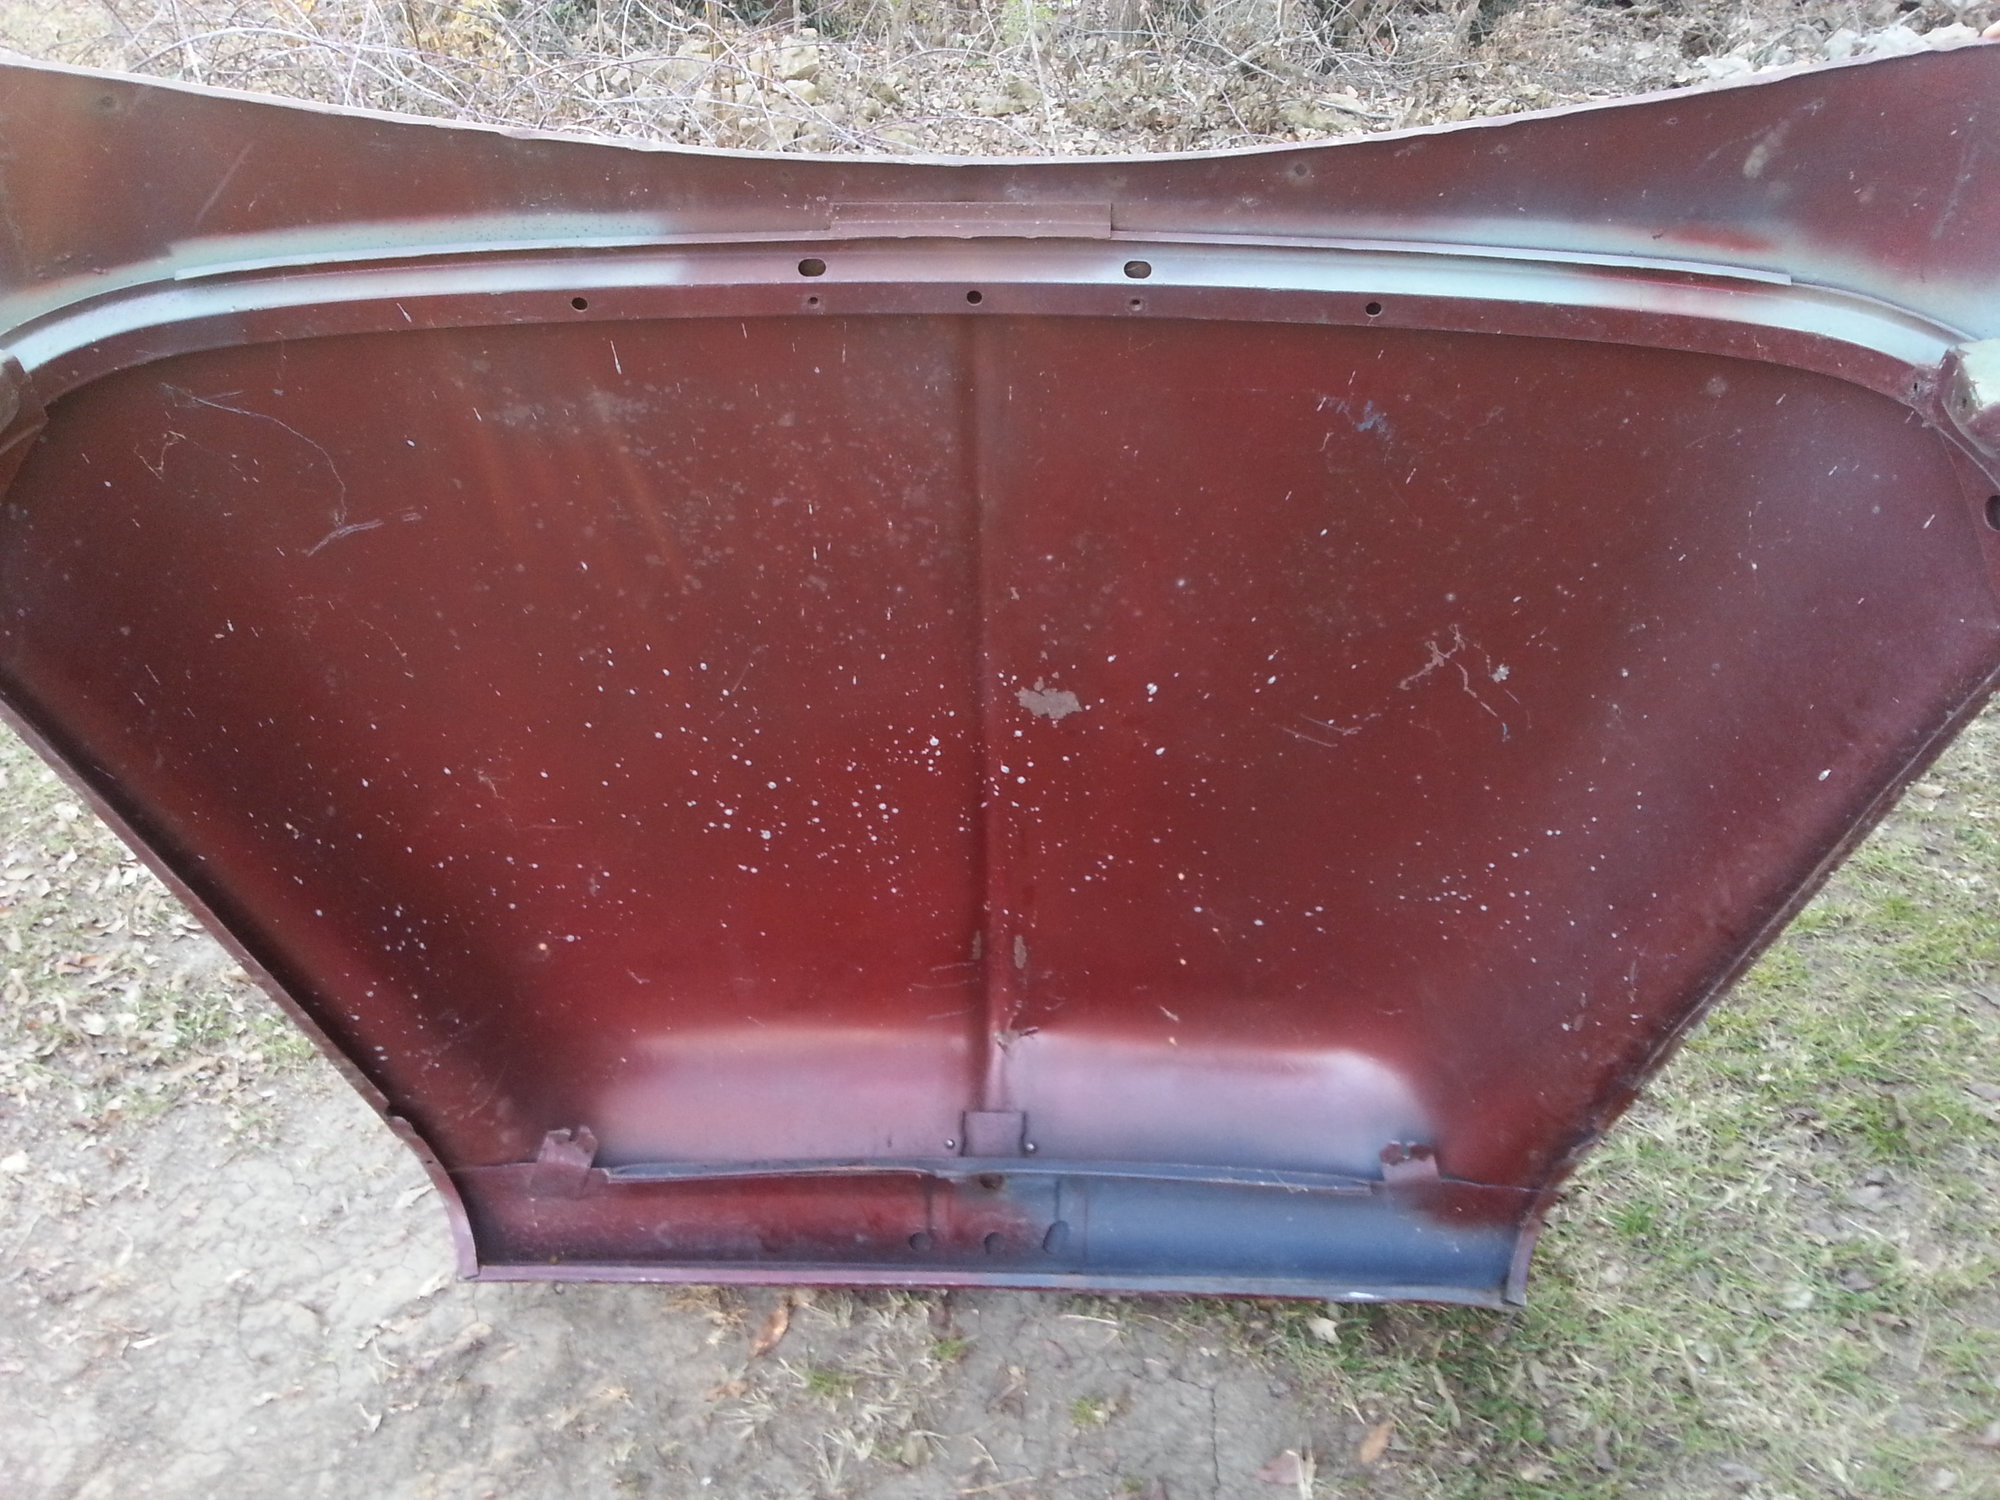 Exterior Body Parts - 1953-1955 Ford F-100 Steel Hood - Used - 1953 to 1955 Ford F-100 - Grain Valley, MO 64029, United States